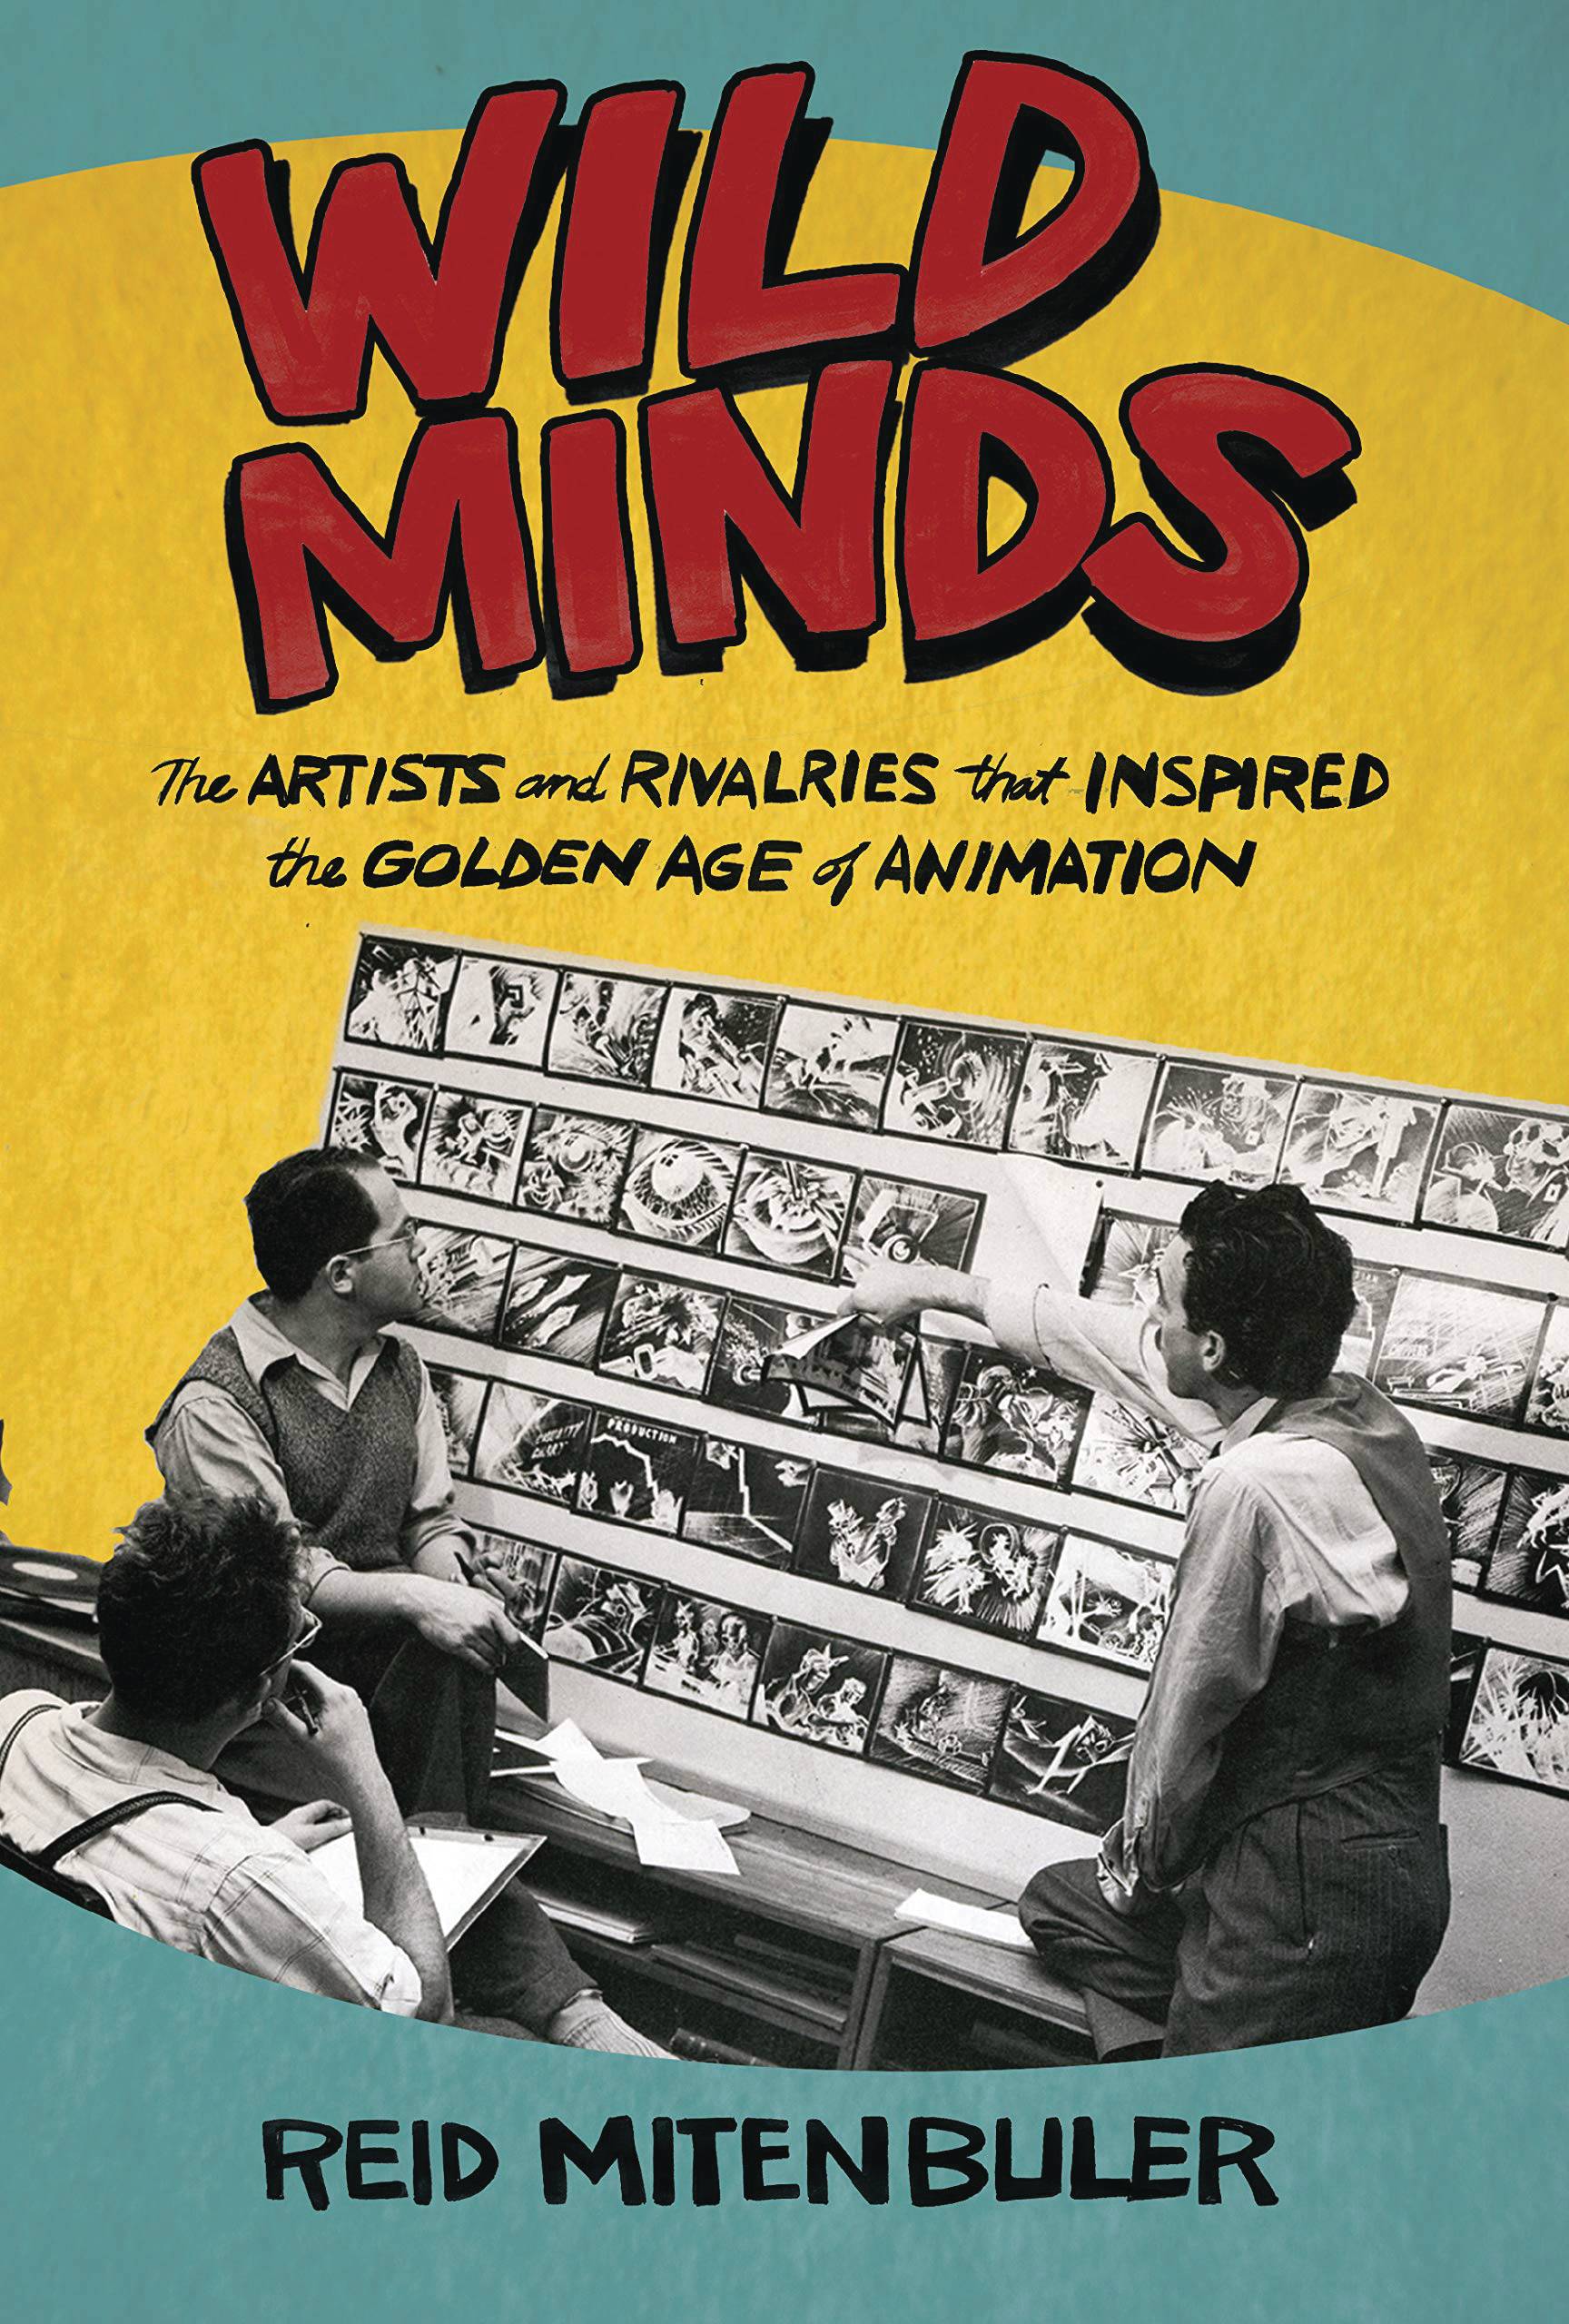 WILD MINDS ARTISTS RIVALRIES INSPIRED GOLDEN AGE ANIMATION S